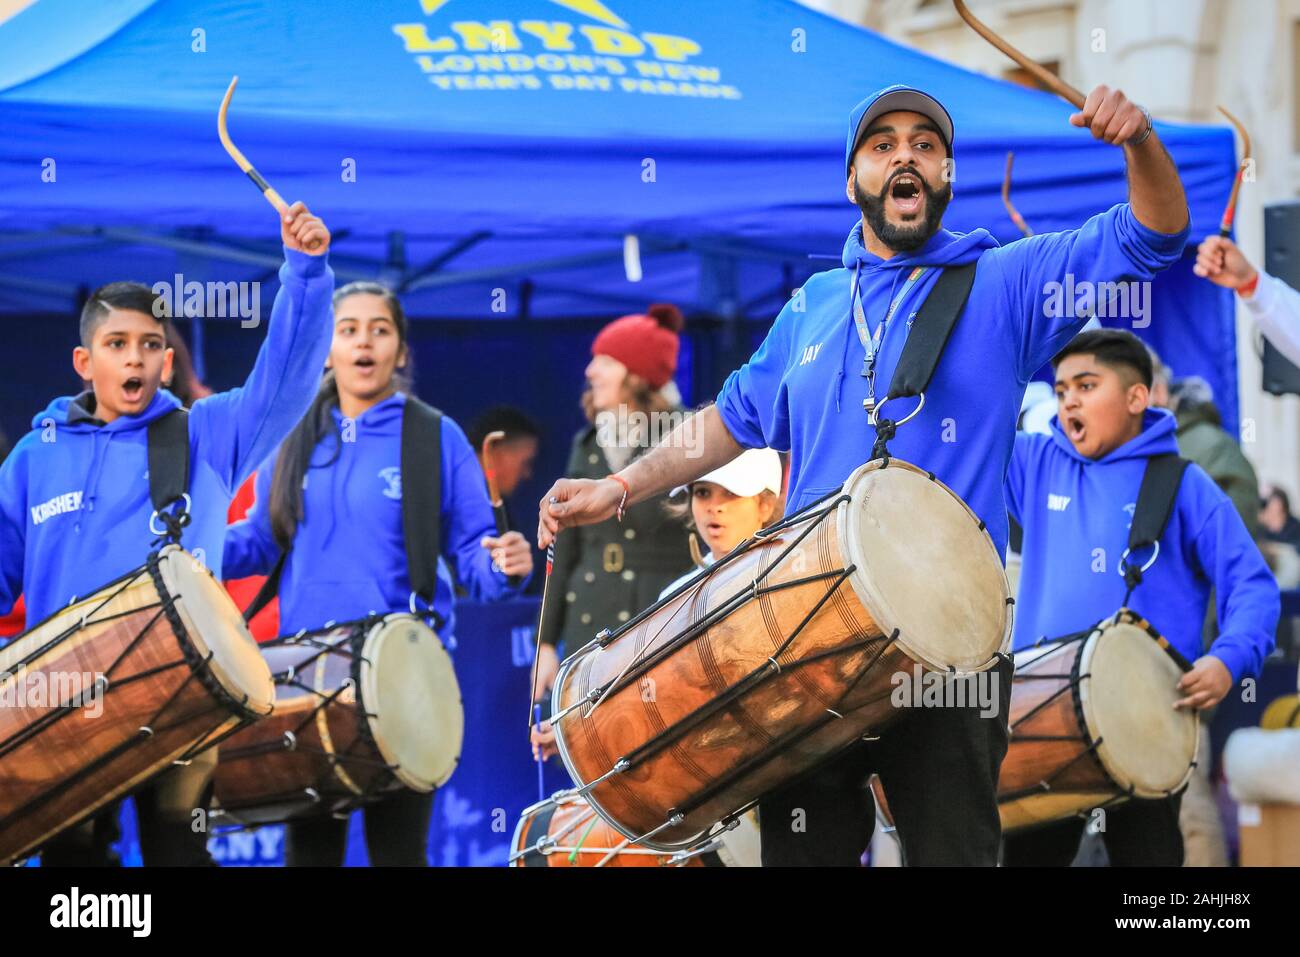 Covent Garden, London, 30th Dec 2019. London School of Dhol perform South Asian rhythms with their double-sided drums.The London New Year's Day Parade (or LNYDP) have chosen the vibrant Covent Garden Piazza for this year's preview event, showcasing several of their participating groups. The parade itself will start at 12 Noon on January 1st and proceed through central London. Credit: Imageplotter/Alamy Live News Stock Photo